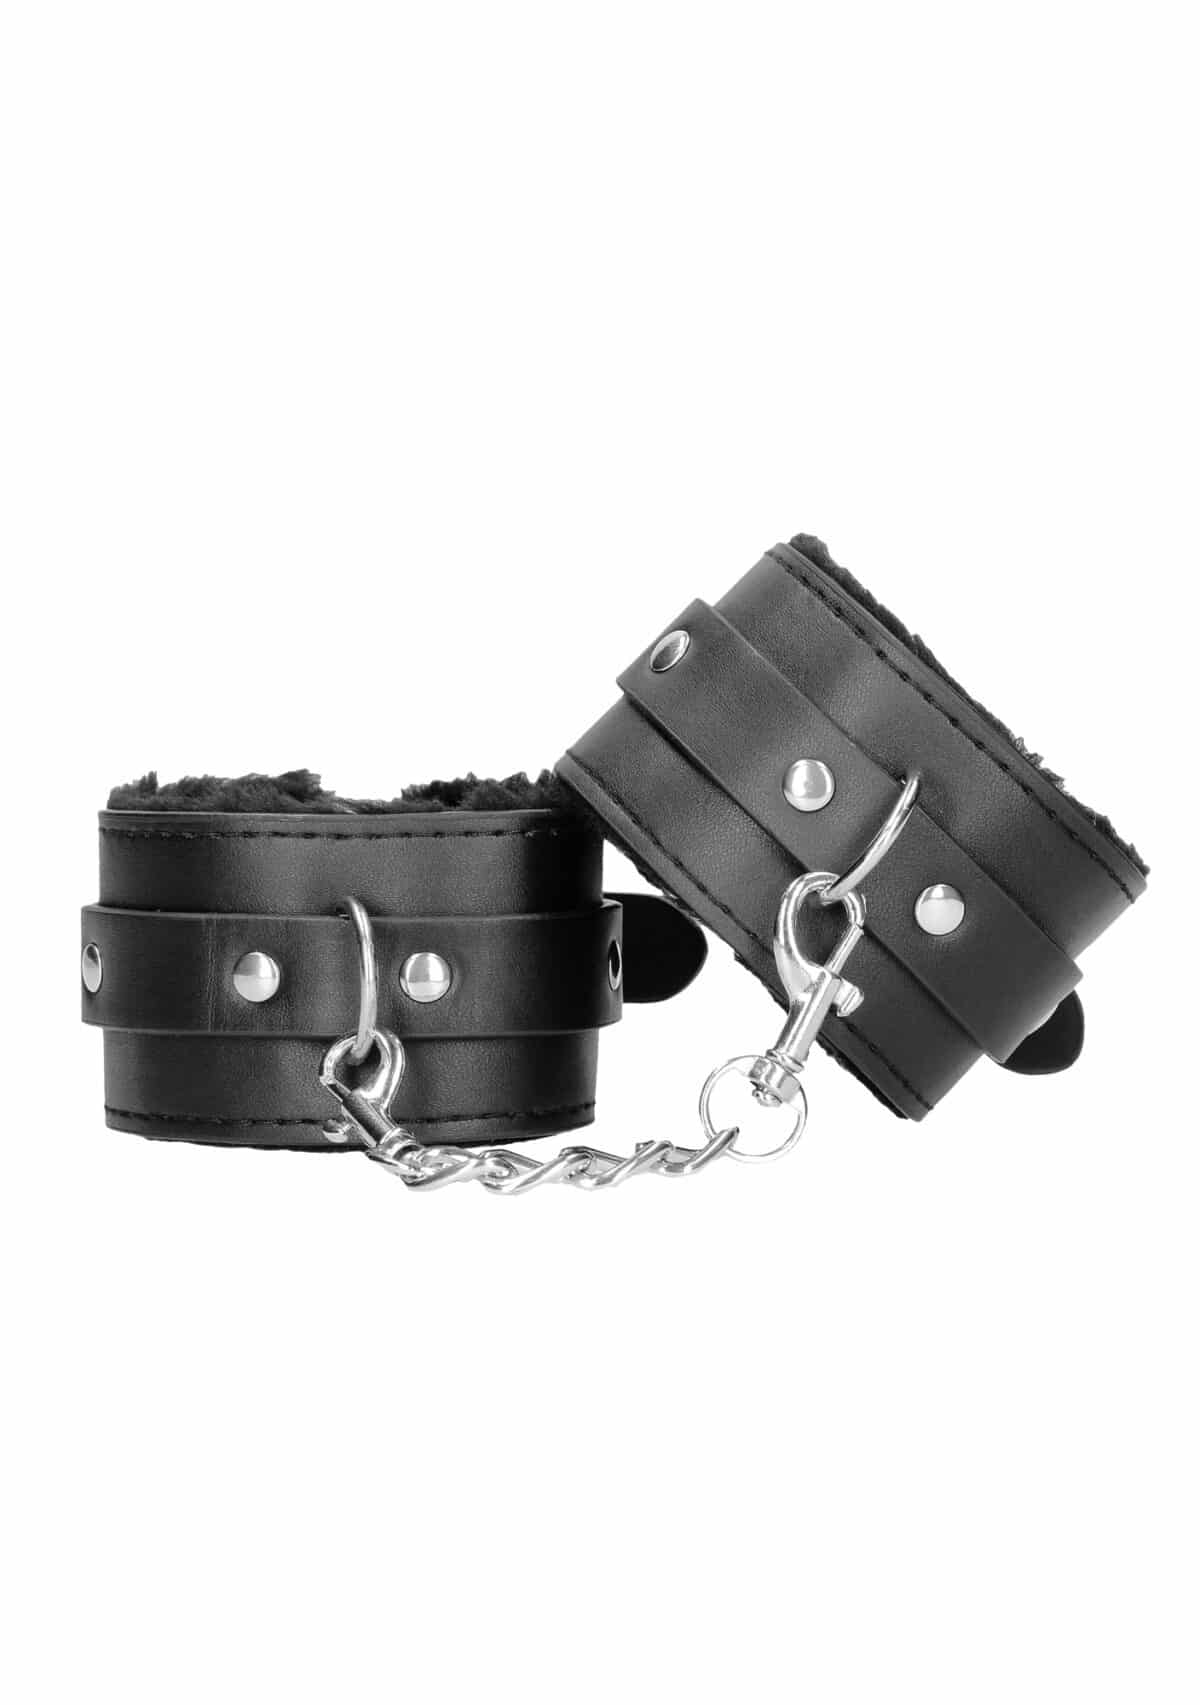 Plush Bonded Leather Hand Cuffs